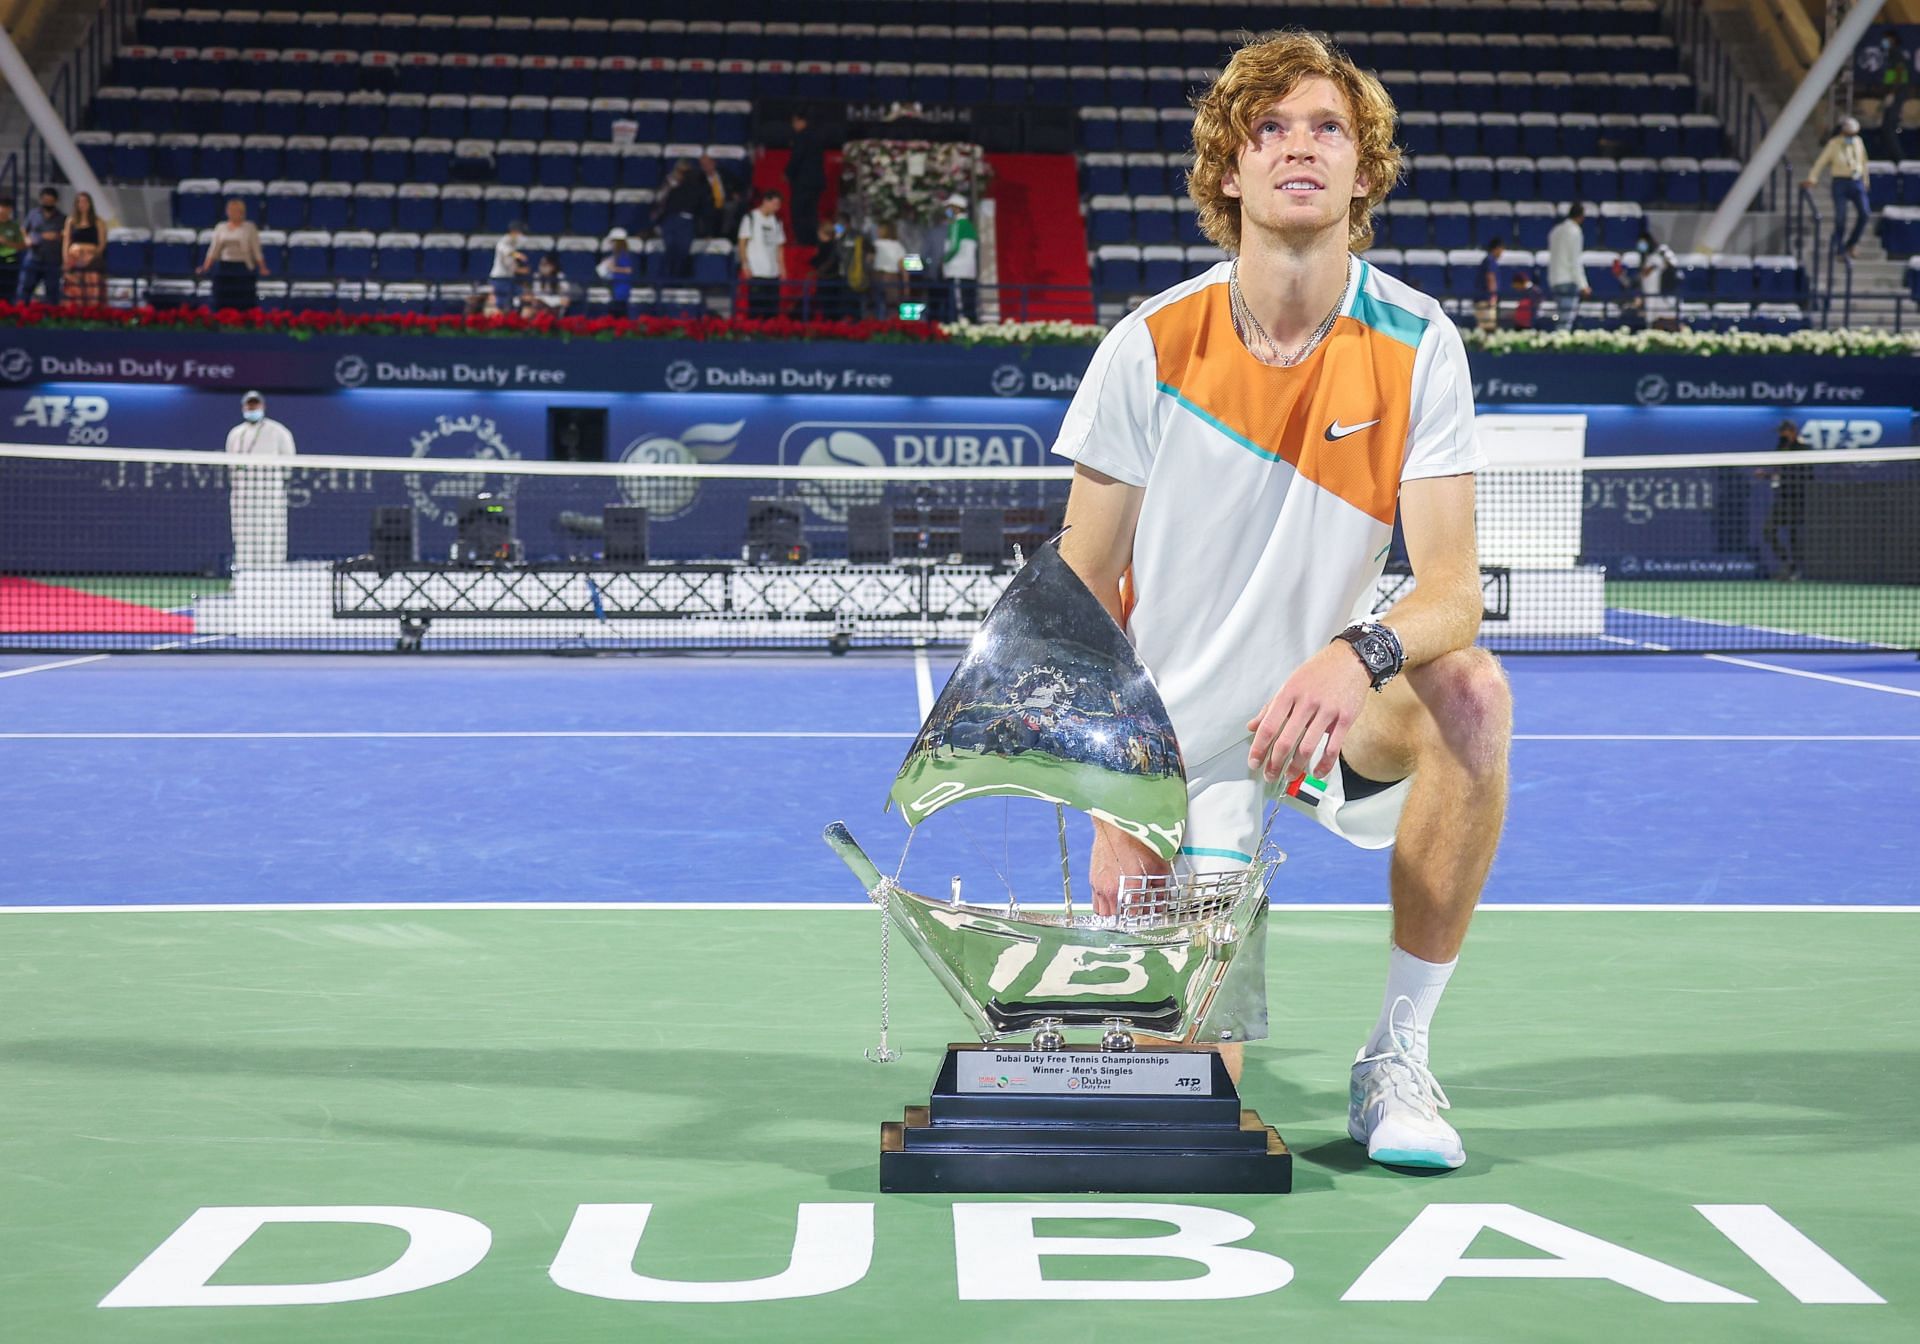 Andrey Rublev at the Dubai Duty Free Tennis Championships